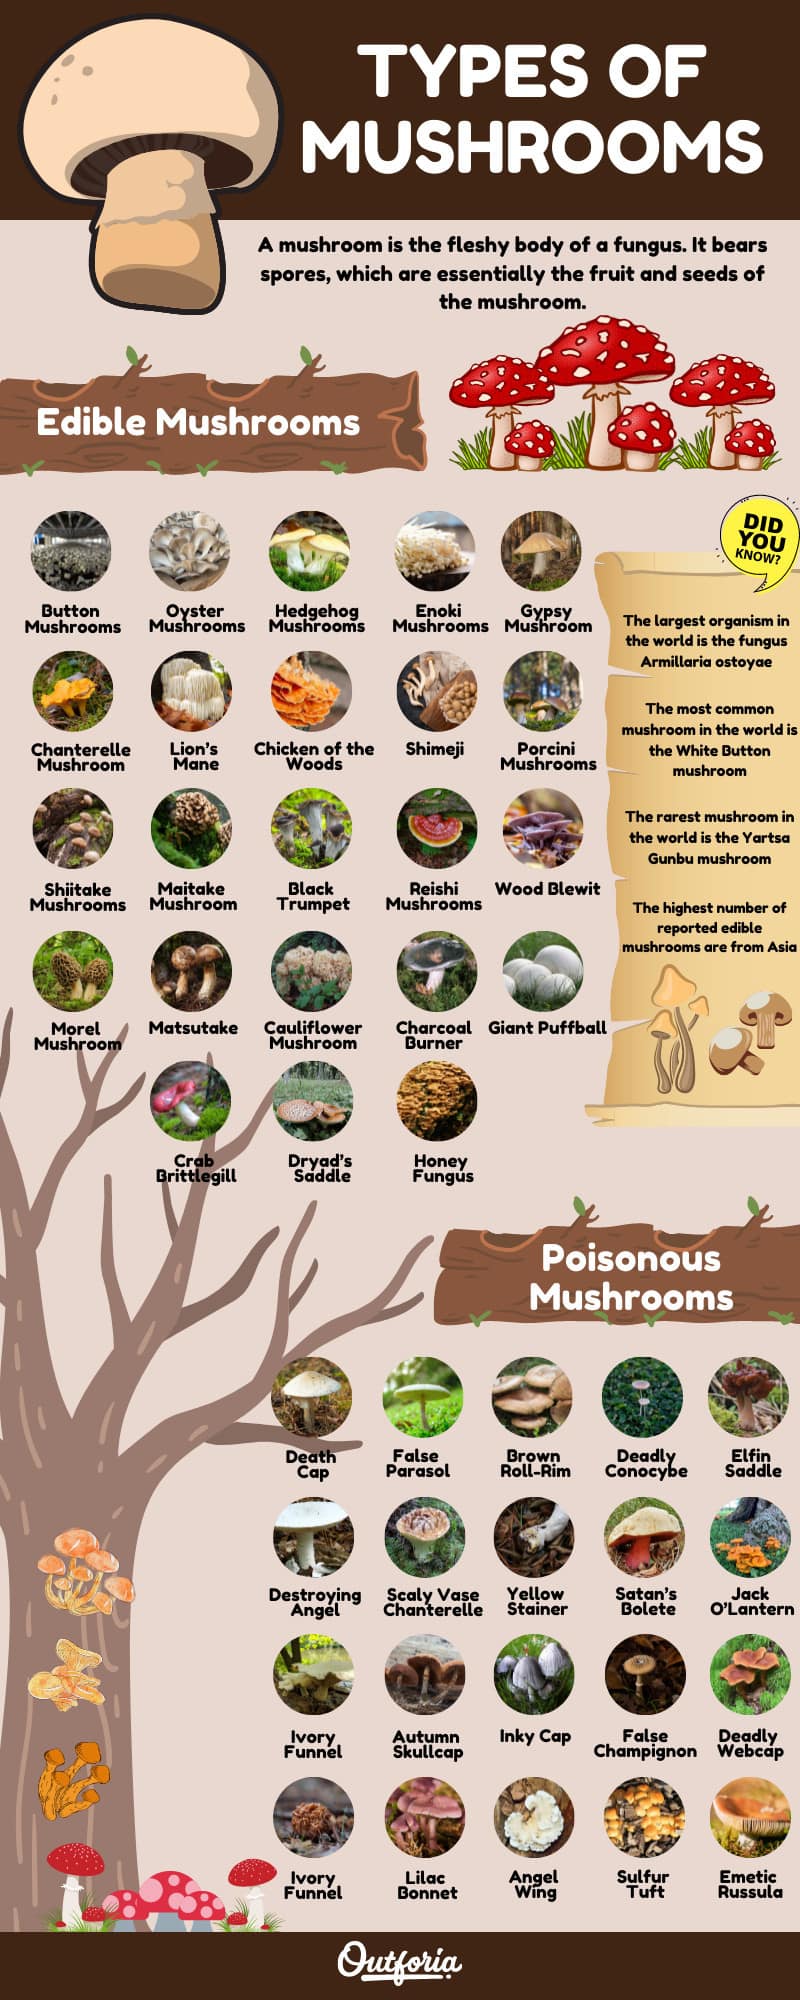 Types of edible and poisonous mushrooms infographic chart with 